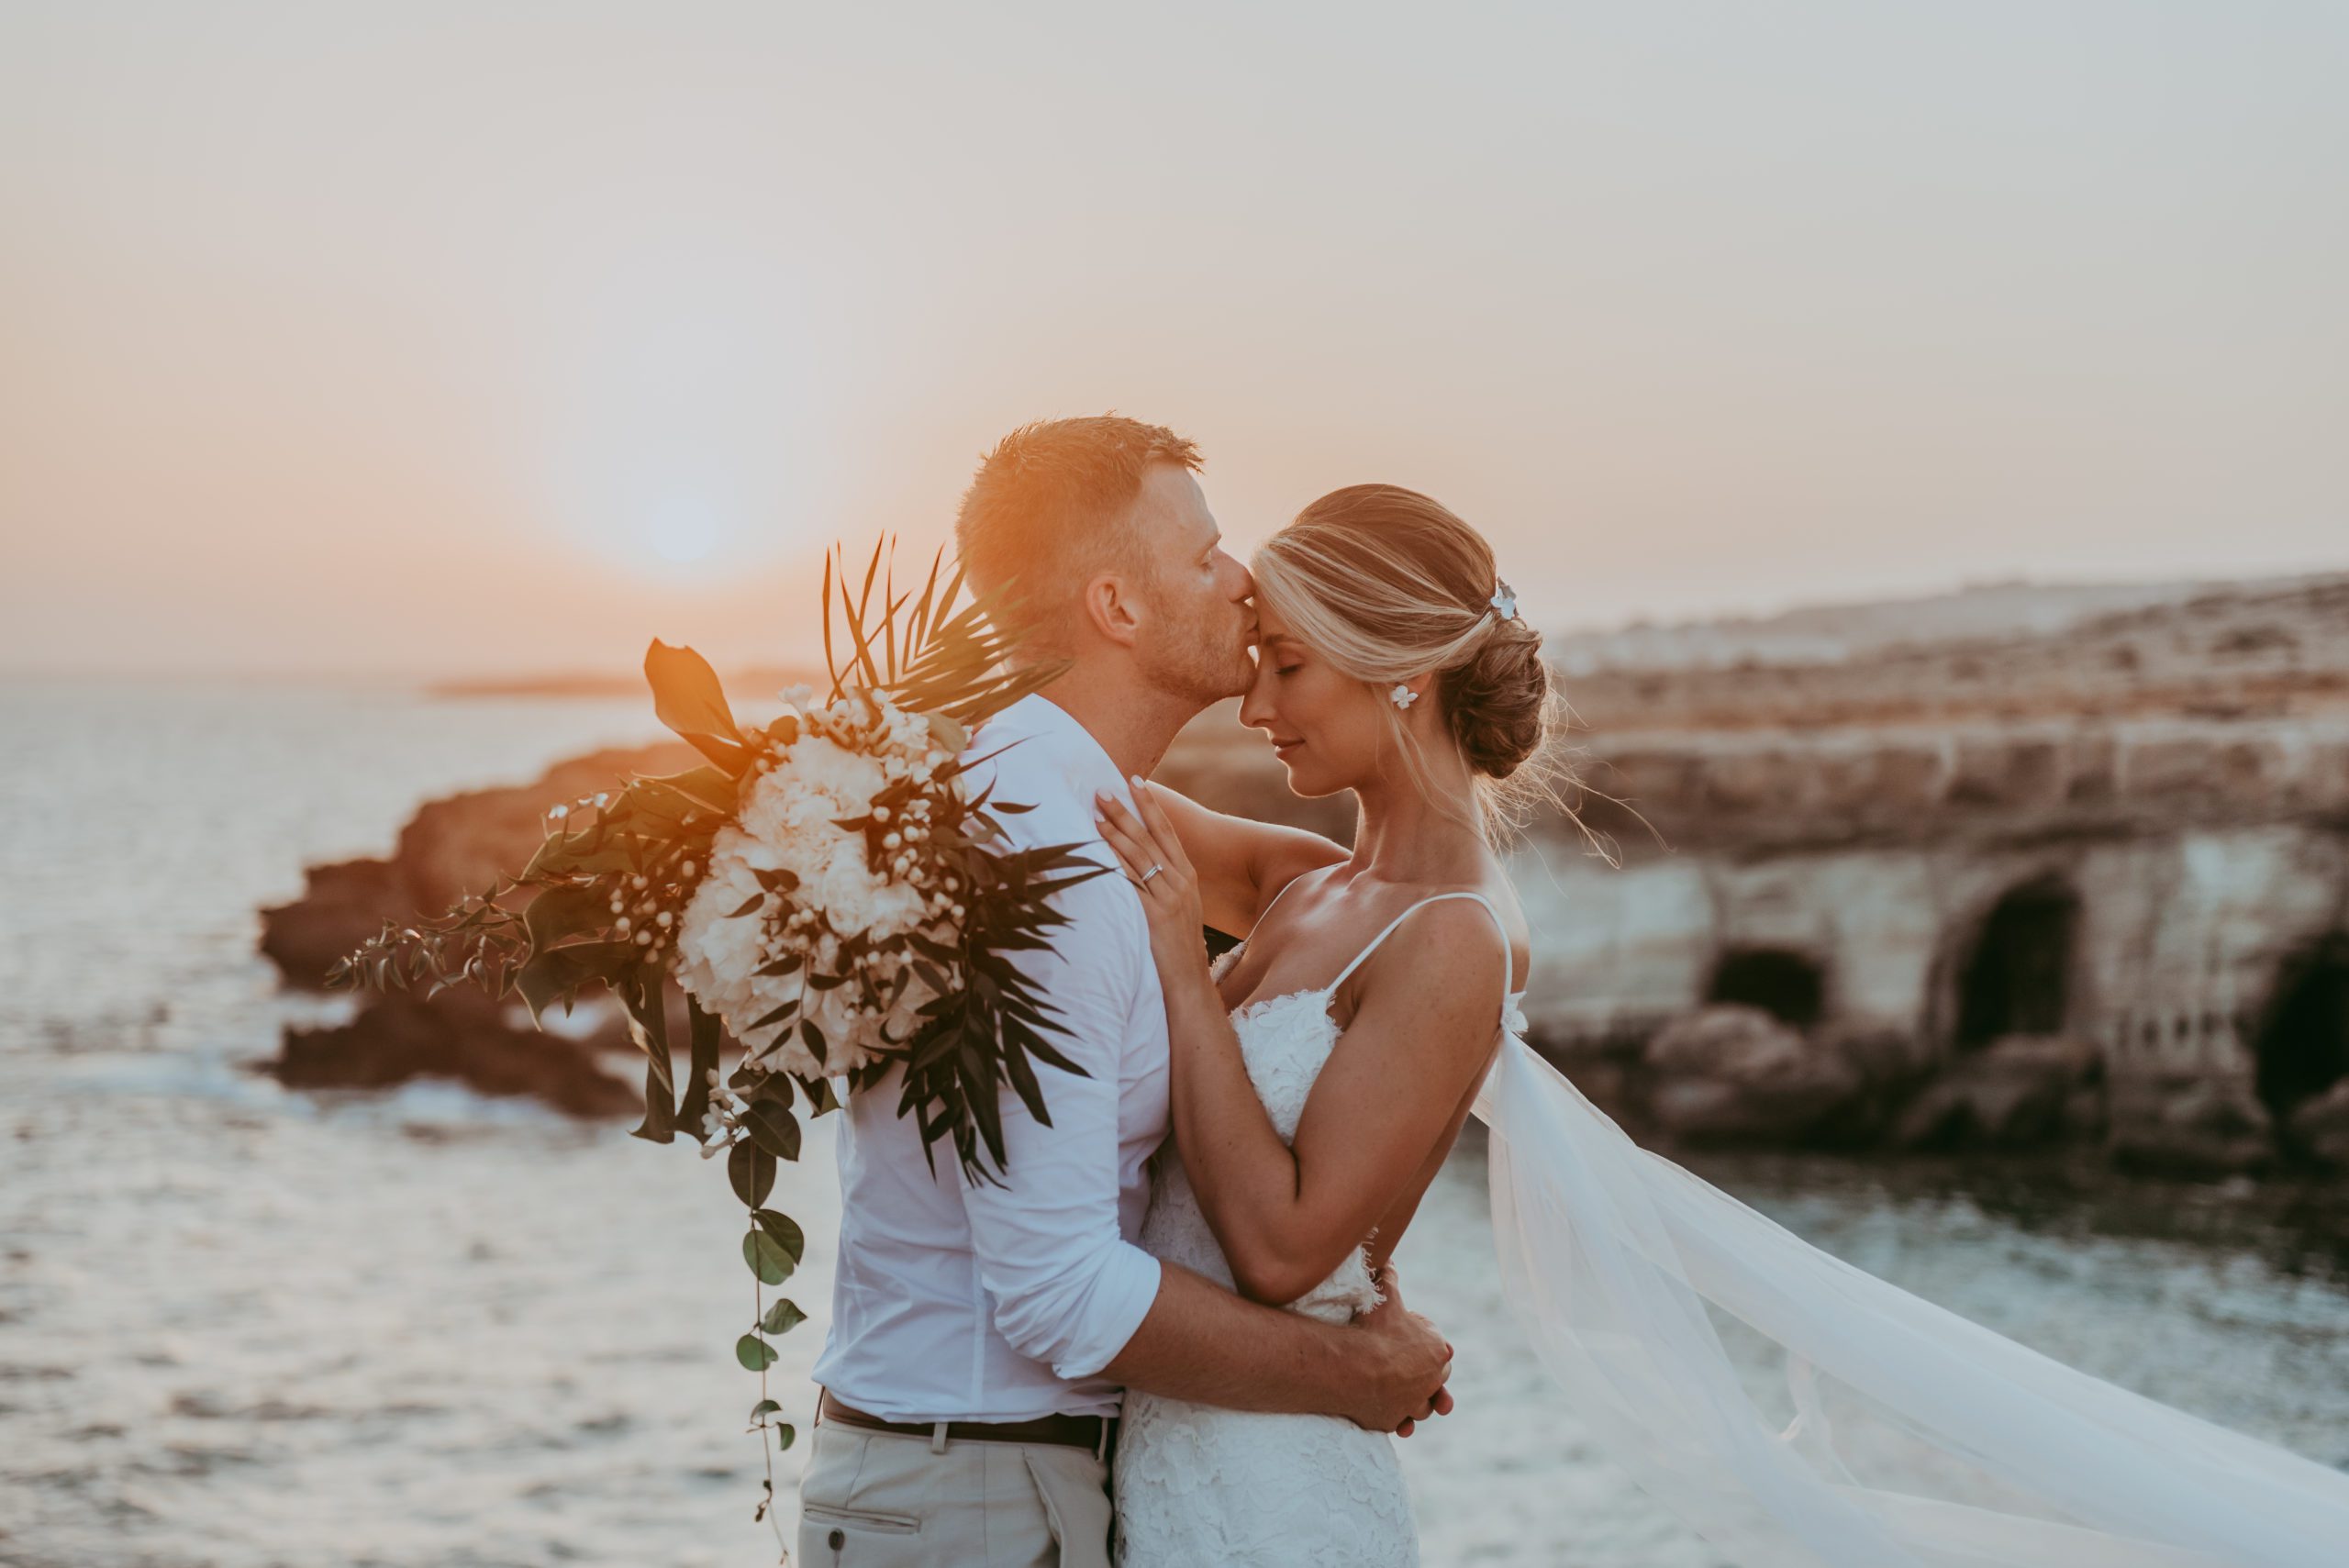 A gentle kiss as the sun sets behind the married couple